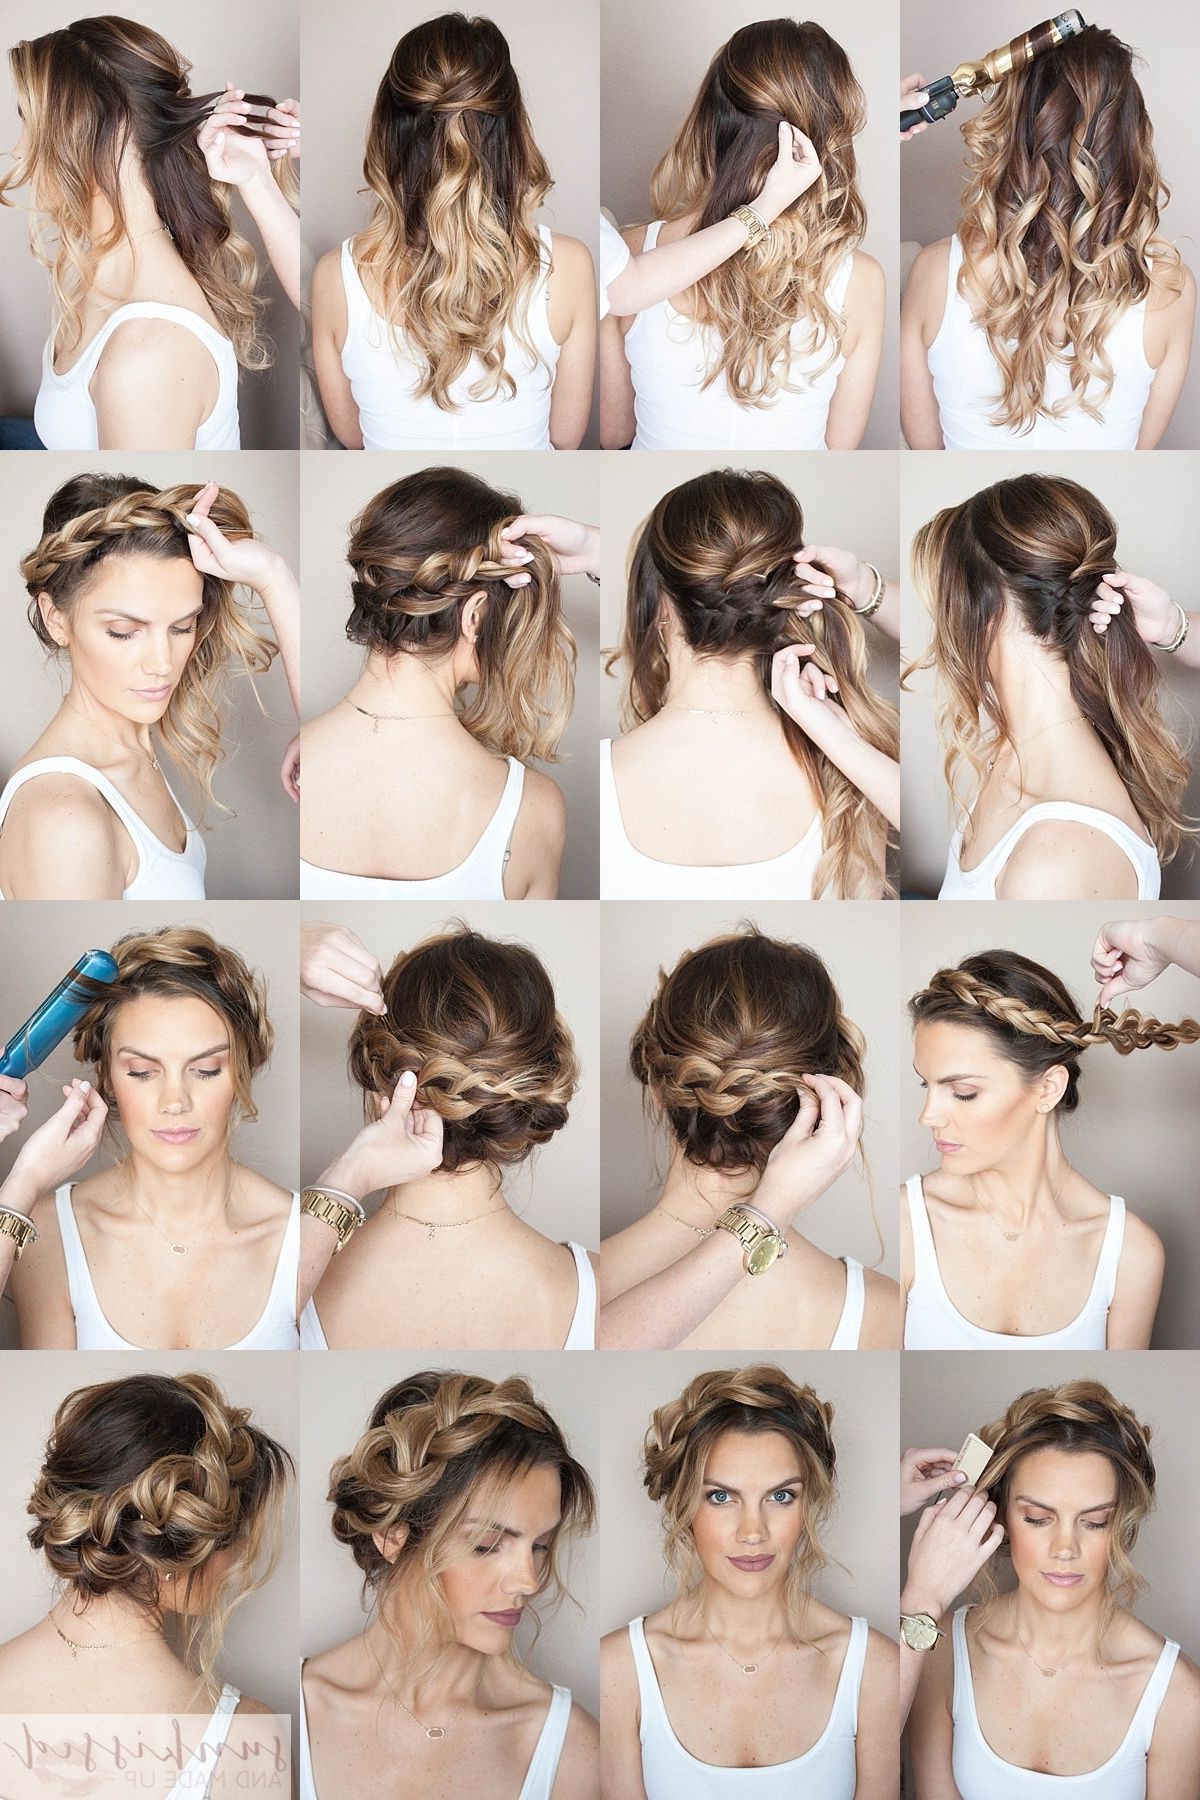 Crown Braid Tutorial // Braided Crown How To // Halo Braid Regarding Most Up To Date Halo Braided Hairstyles (Gallery 19 of 20)